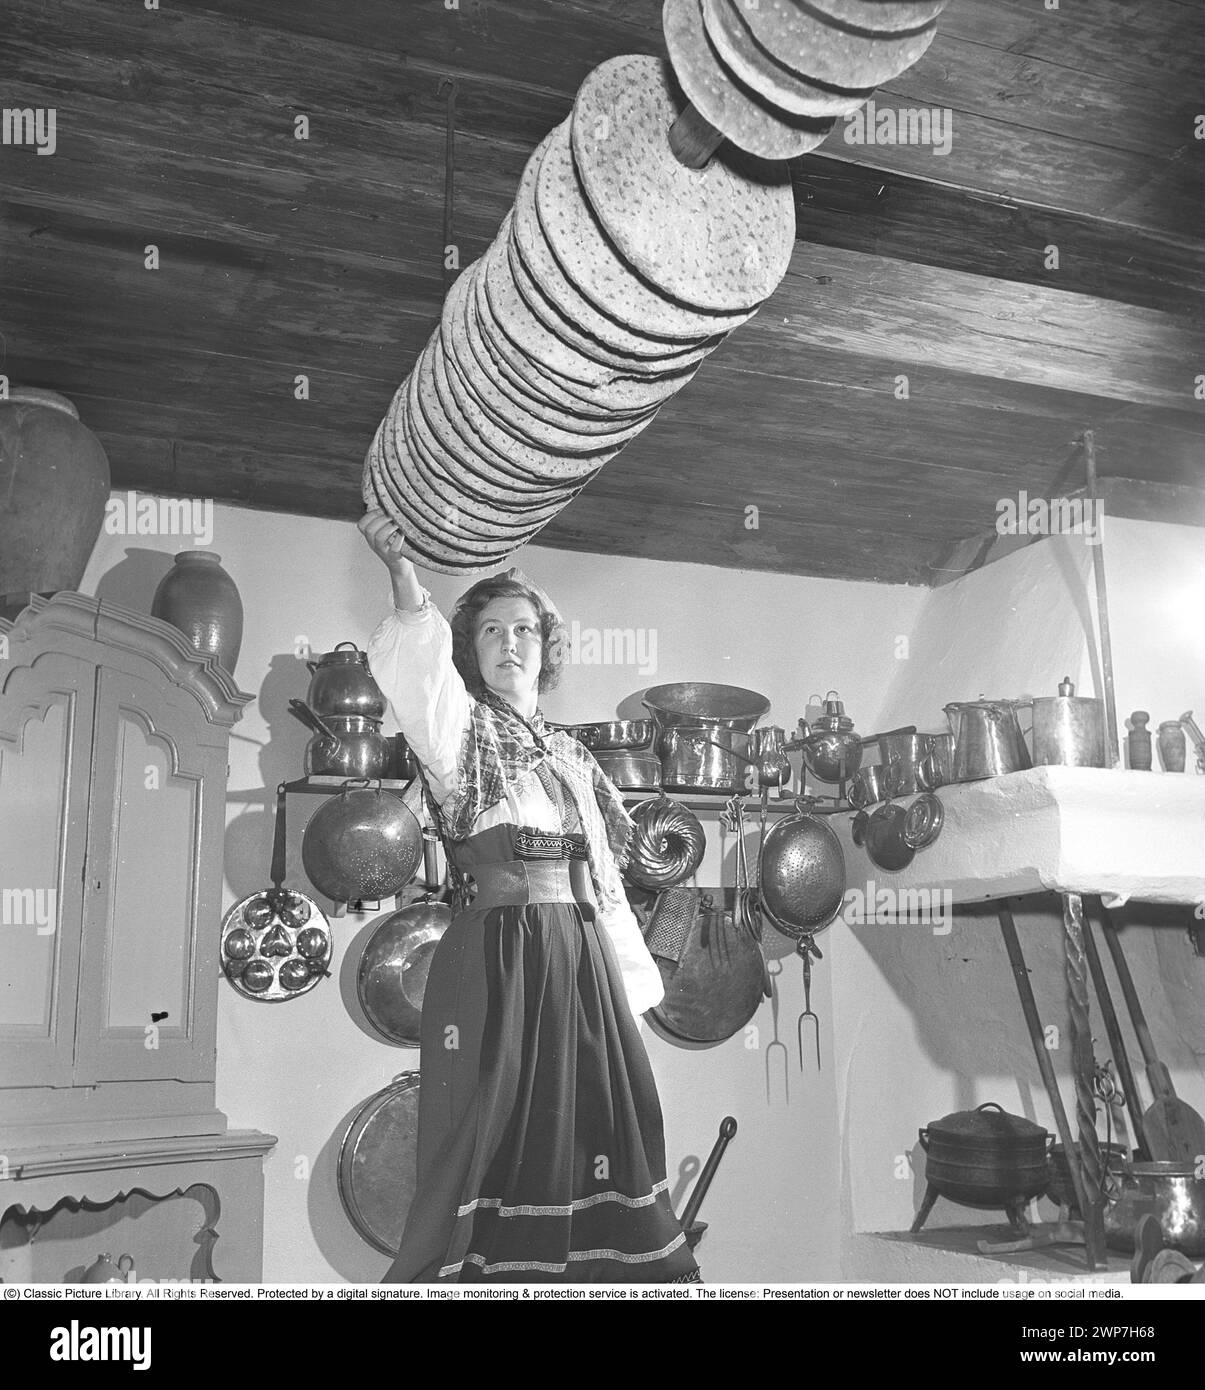 Baking bread 1950. Interior of a kitchen with a women dressed in a traditional swedish  handling crispbread. A flat and dry type of bread, containing mostly rye flour. The baking oven is heated with firewood.  The cripsbread is stored on a rack hanging from a pole in the ceiling, thanks to the hole made in the middle of the cripsbread. A rural kitchen with a wooden fireplace and historical objects as decoration. Sweden 1950. Kristoffersson ref AY55-3 Stock Photo